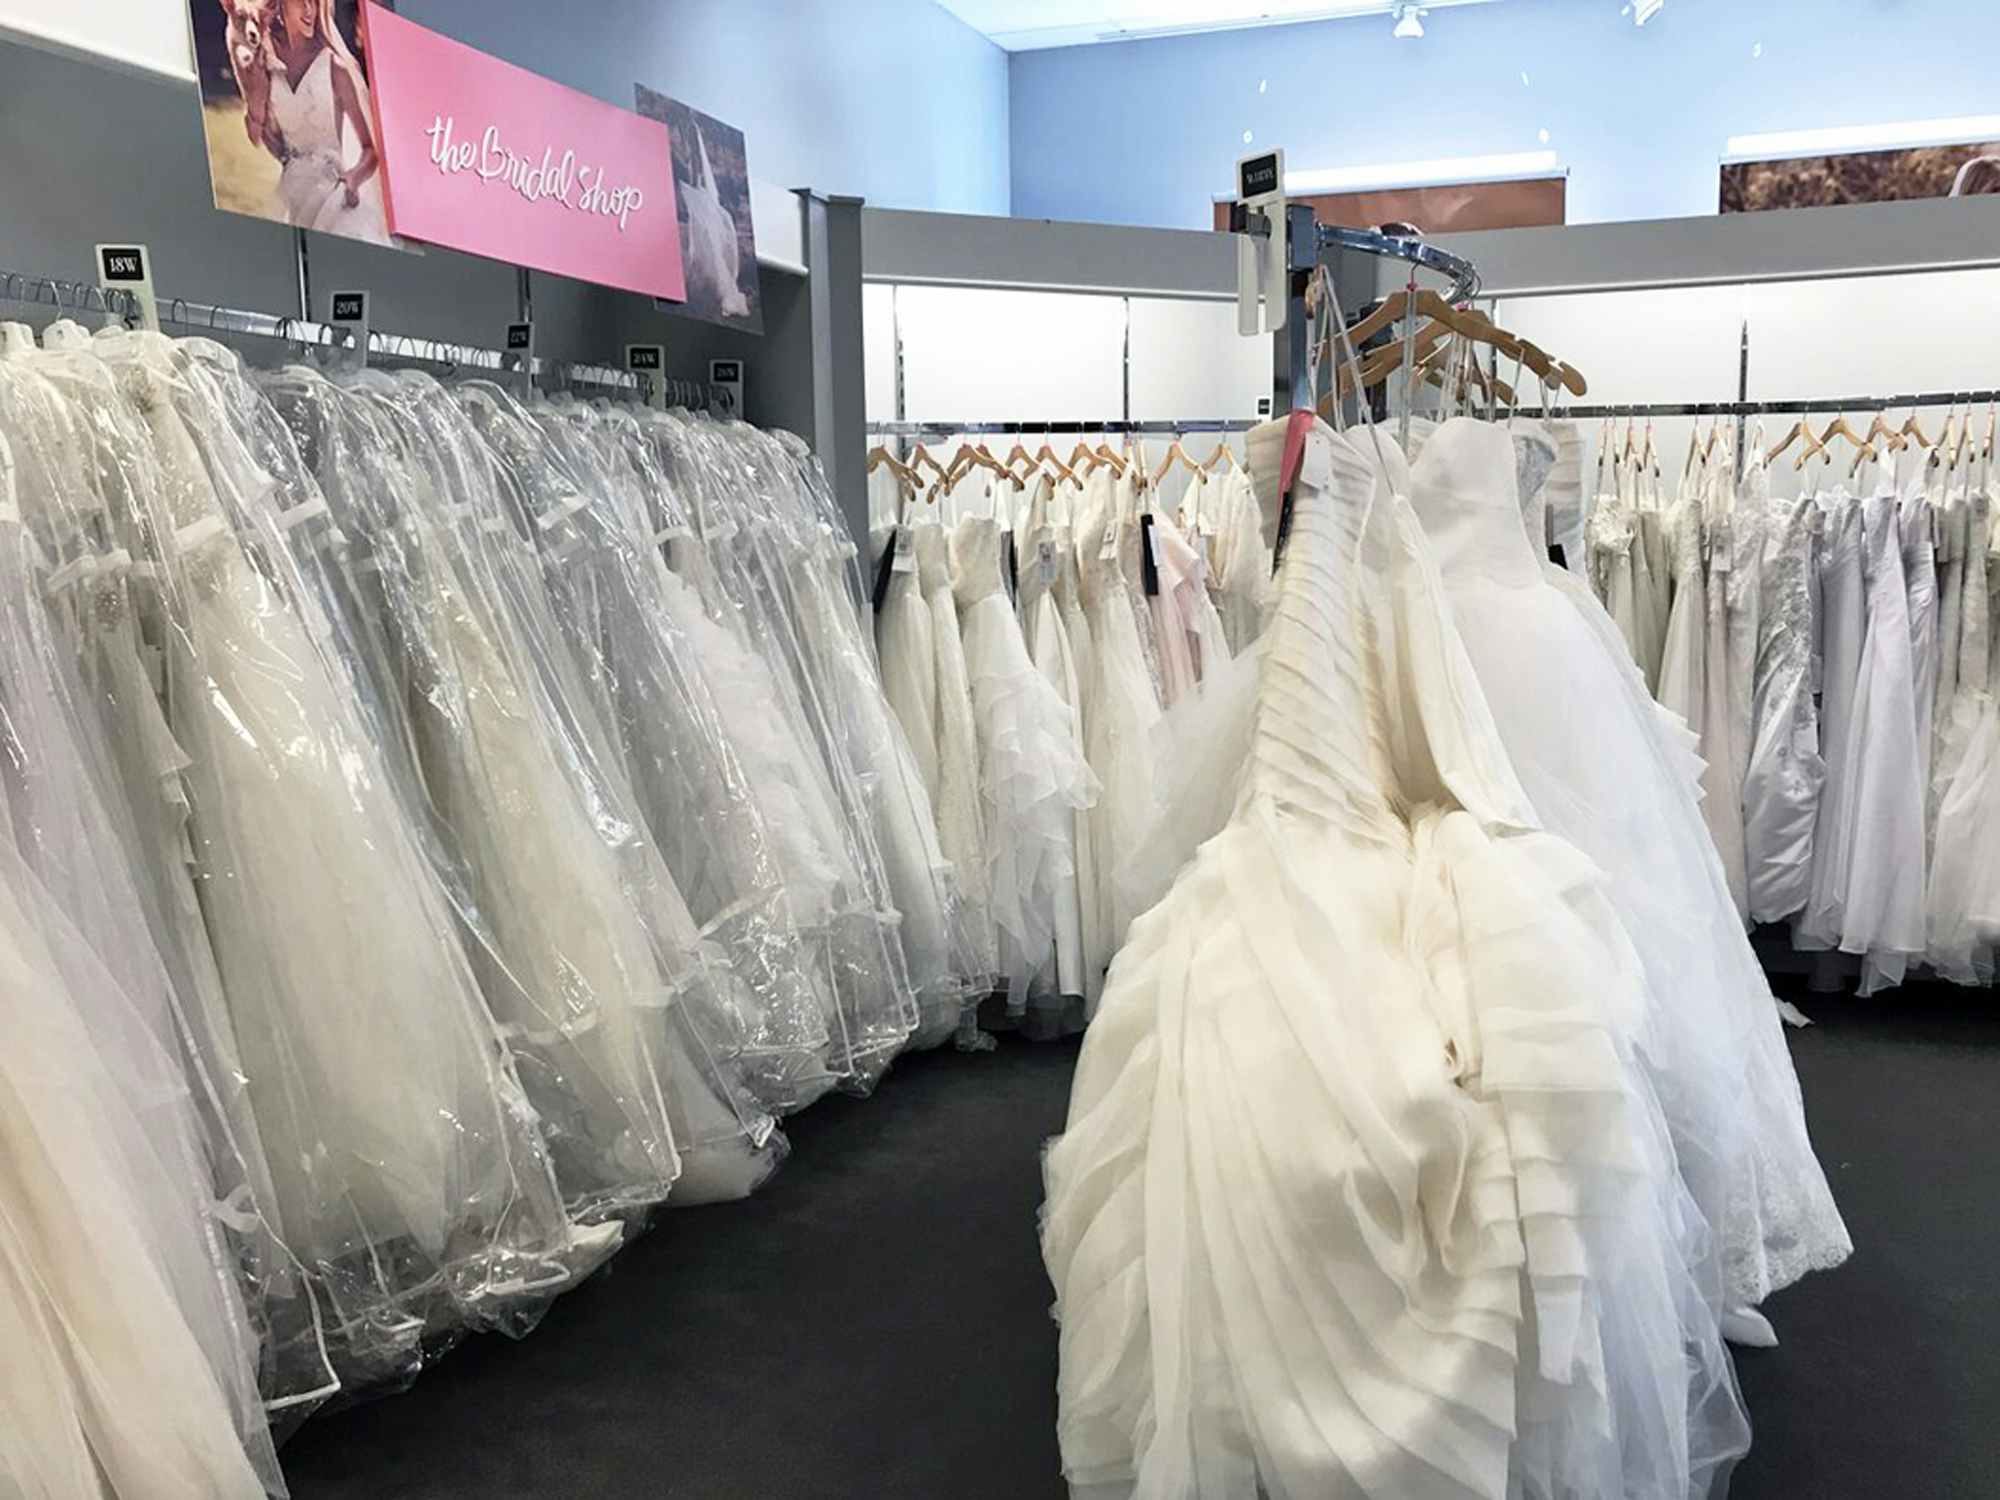 David's Bridal store in West Fargo to close, final day has not